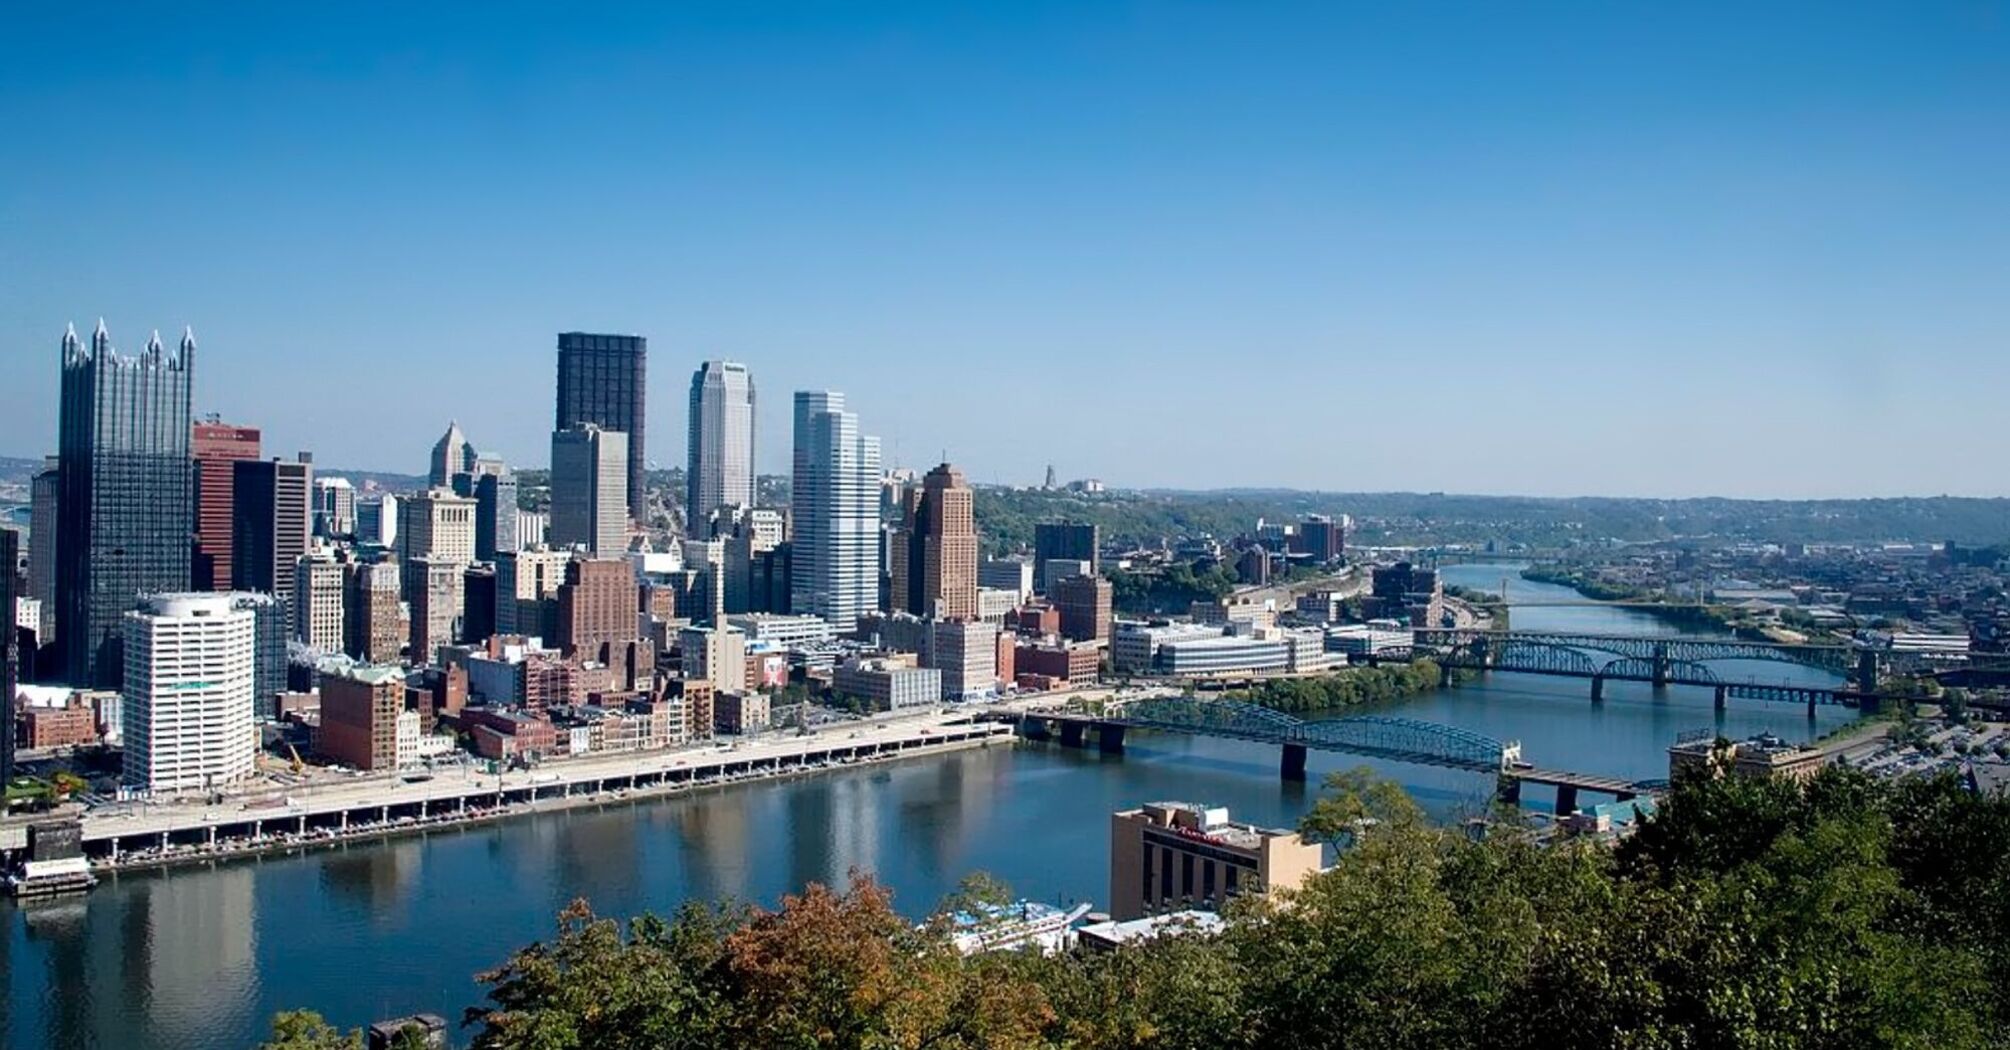 Pittsburgh city skyline with river and bridges in the foreground